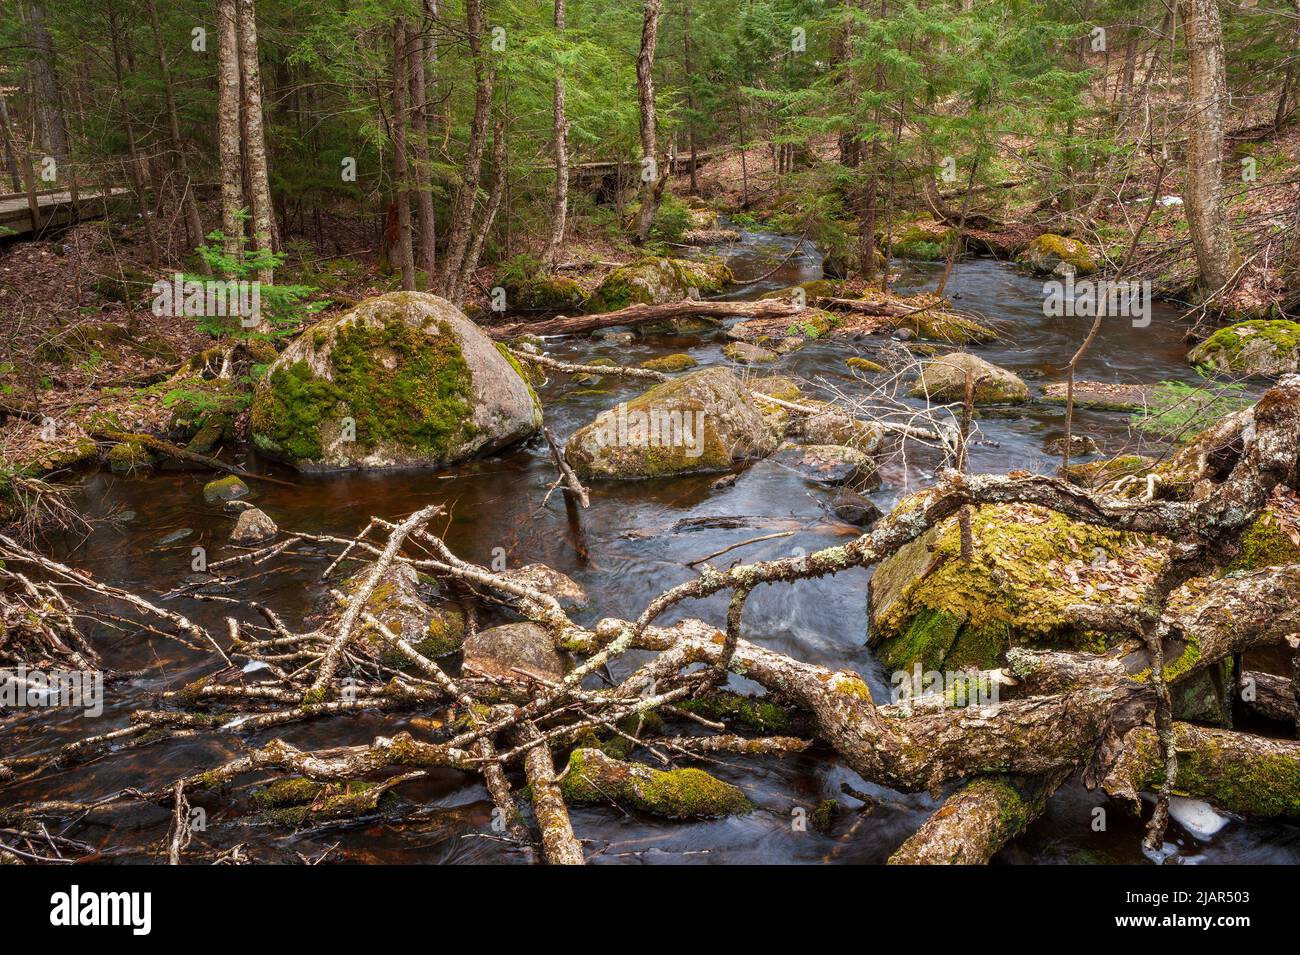 Barnum Brook - a nature trails with a boardwalk along the stream. Water rushing by boulders and fallen trees, through a boreal forest of black spruce. Stock Photo